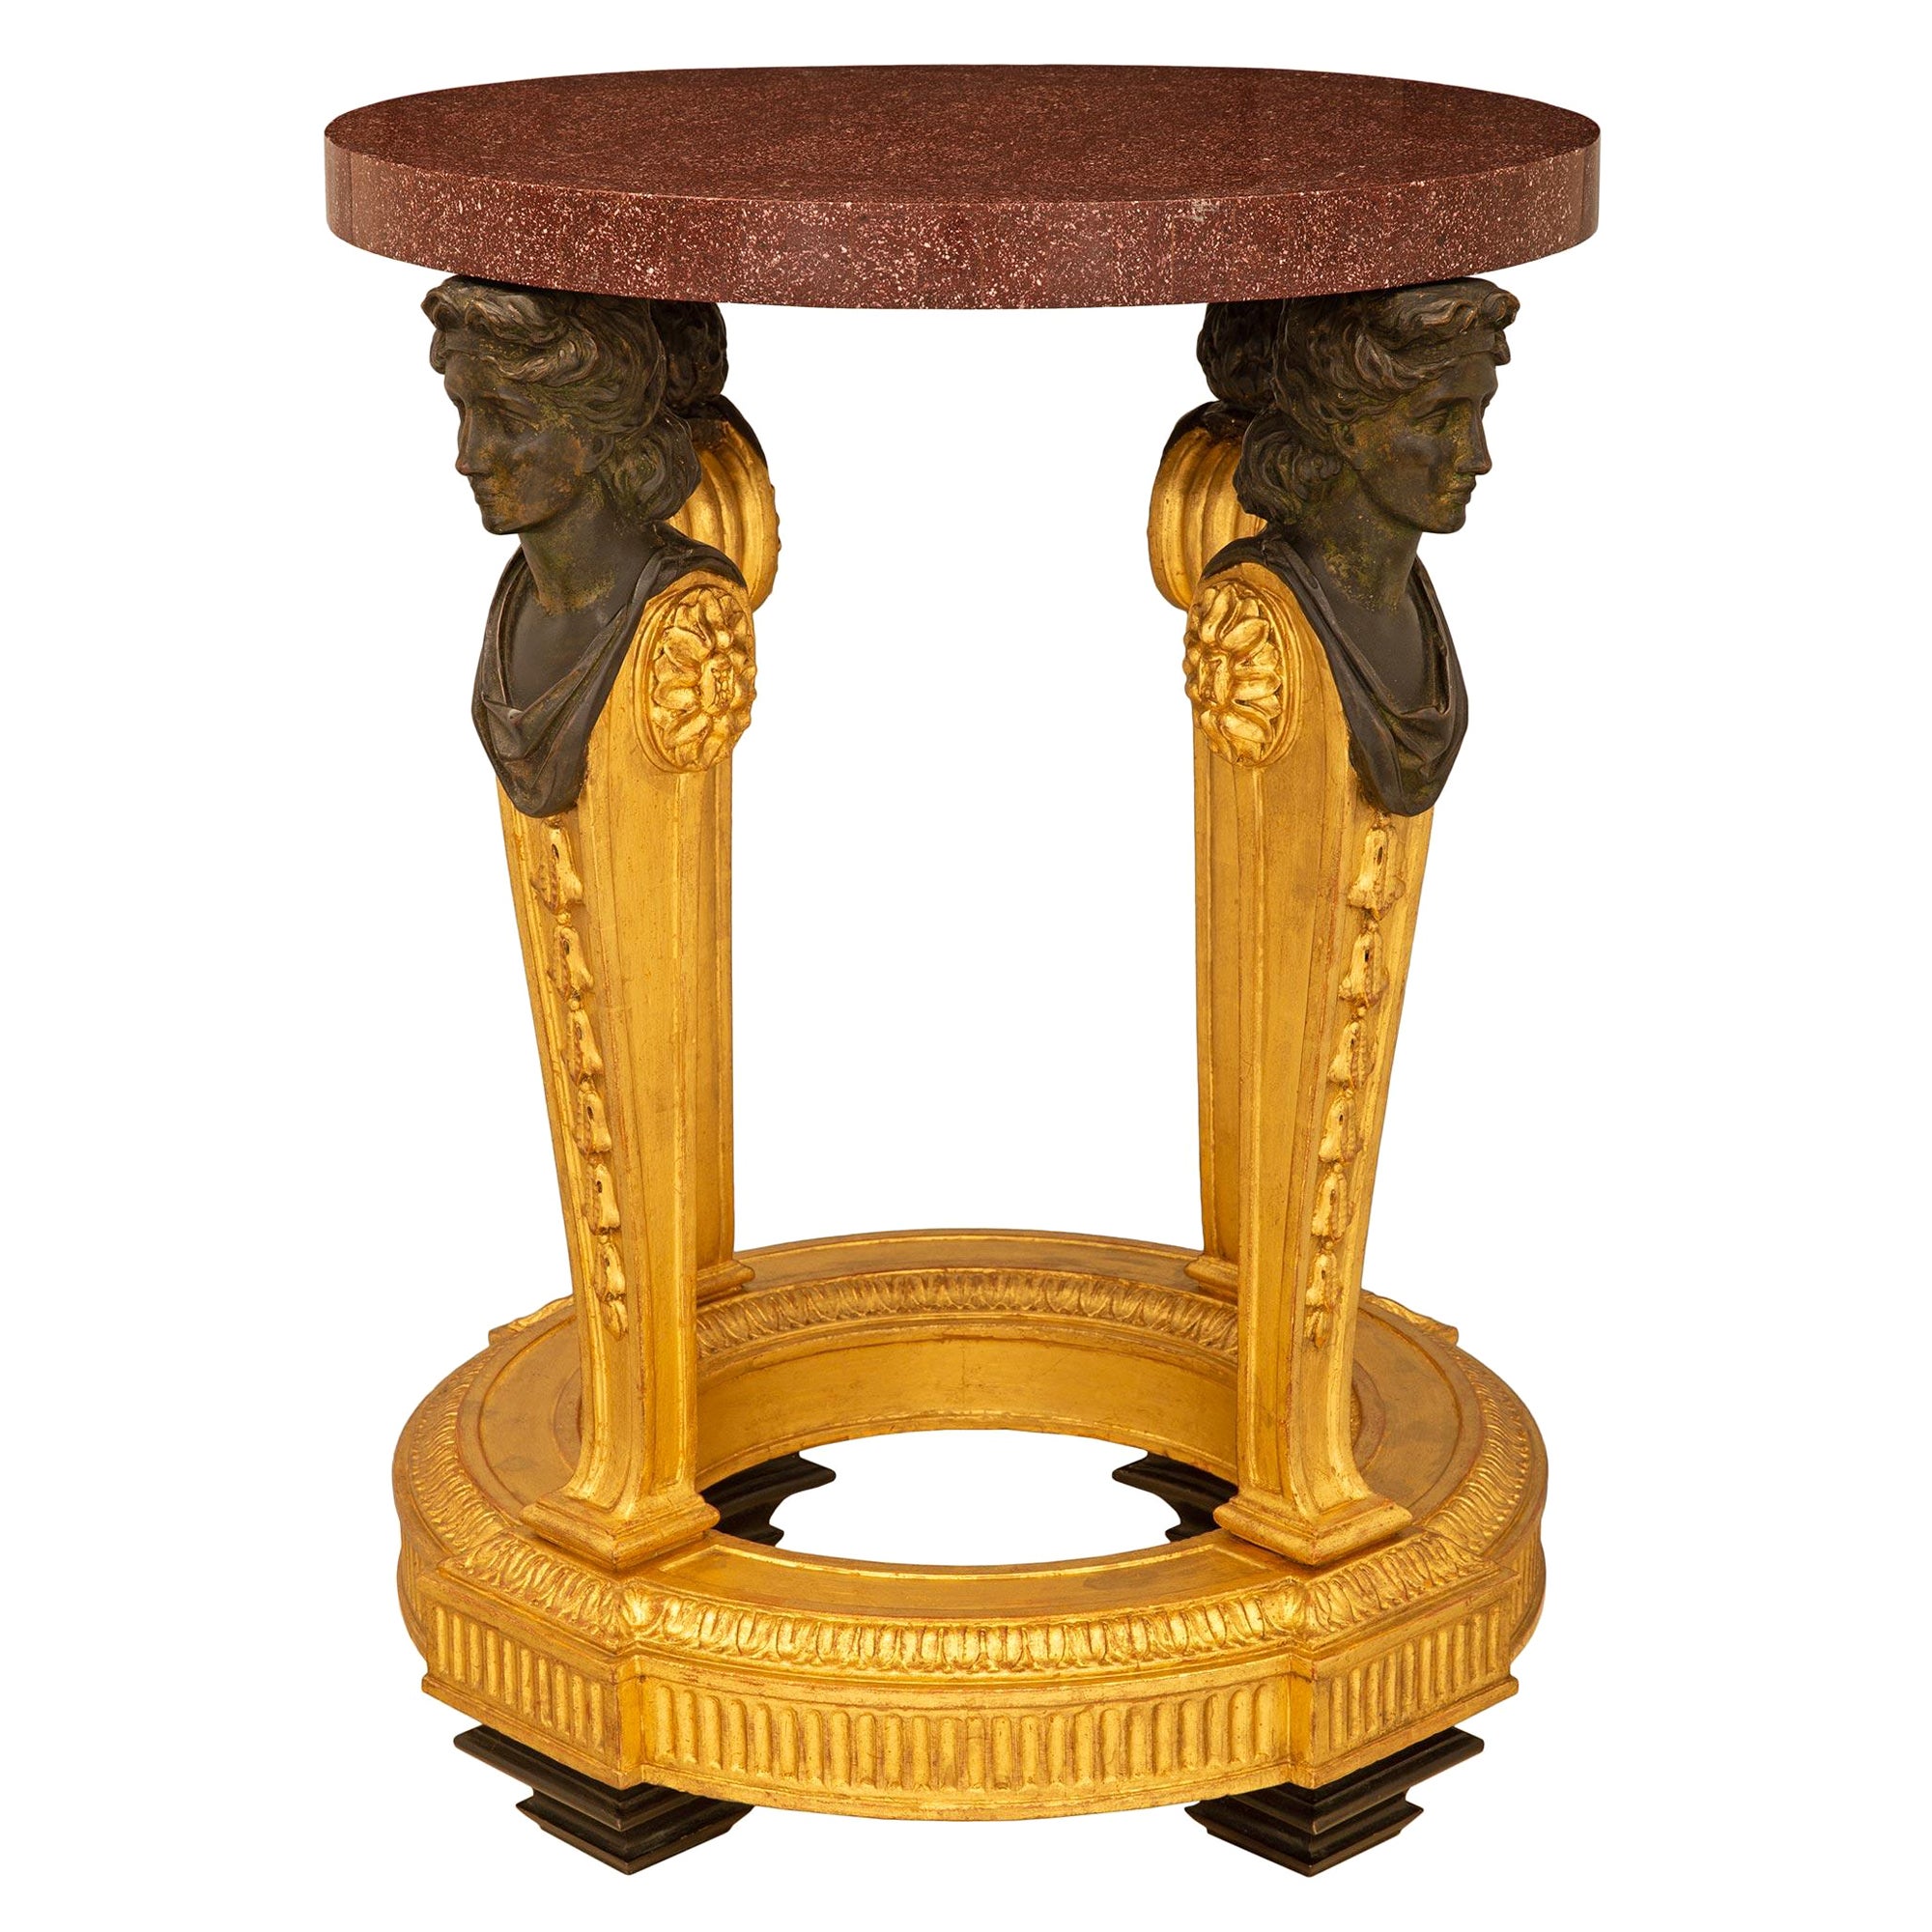 Italian Early 19th Century 1st Empire Period Bronze, Giltwood, & Porphyry Table For Sale